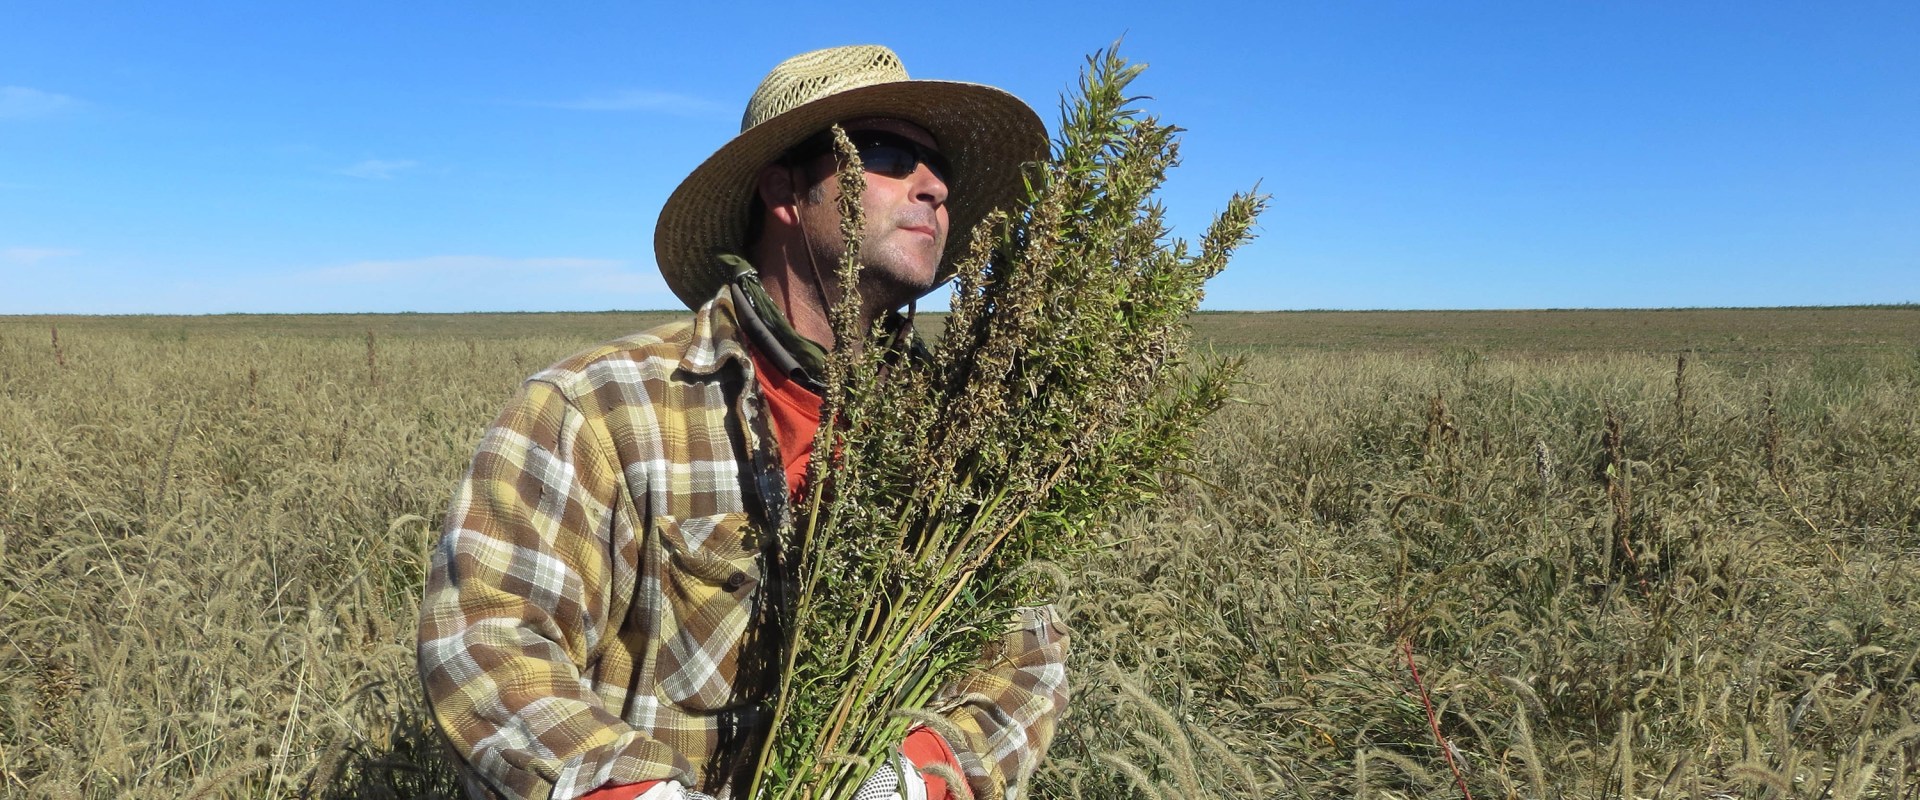 Harvesting Hemp Crops at the Right Time